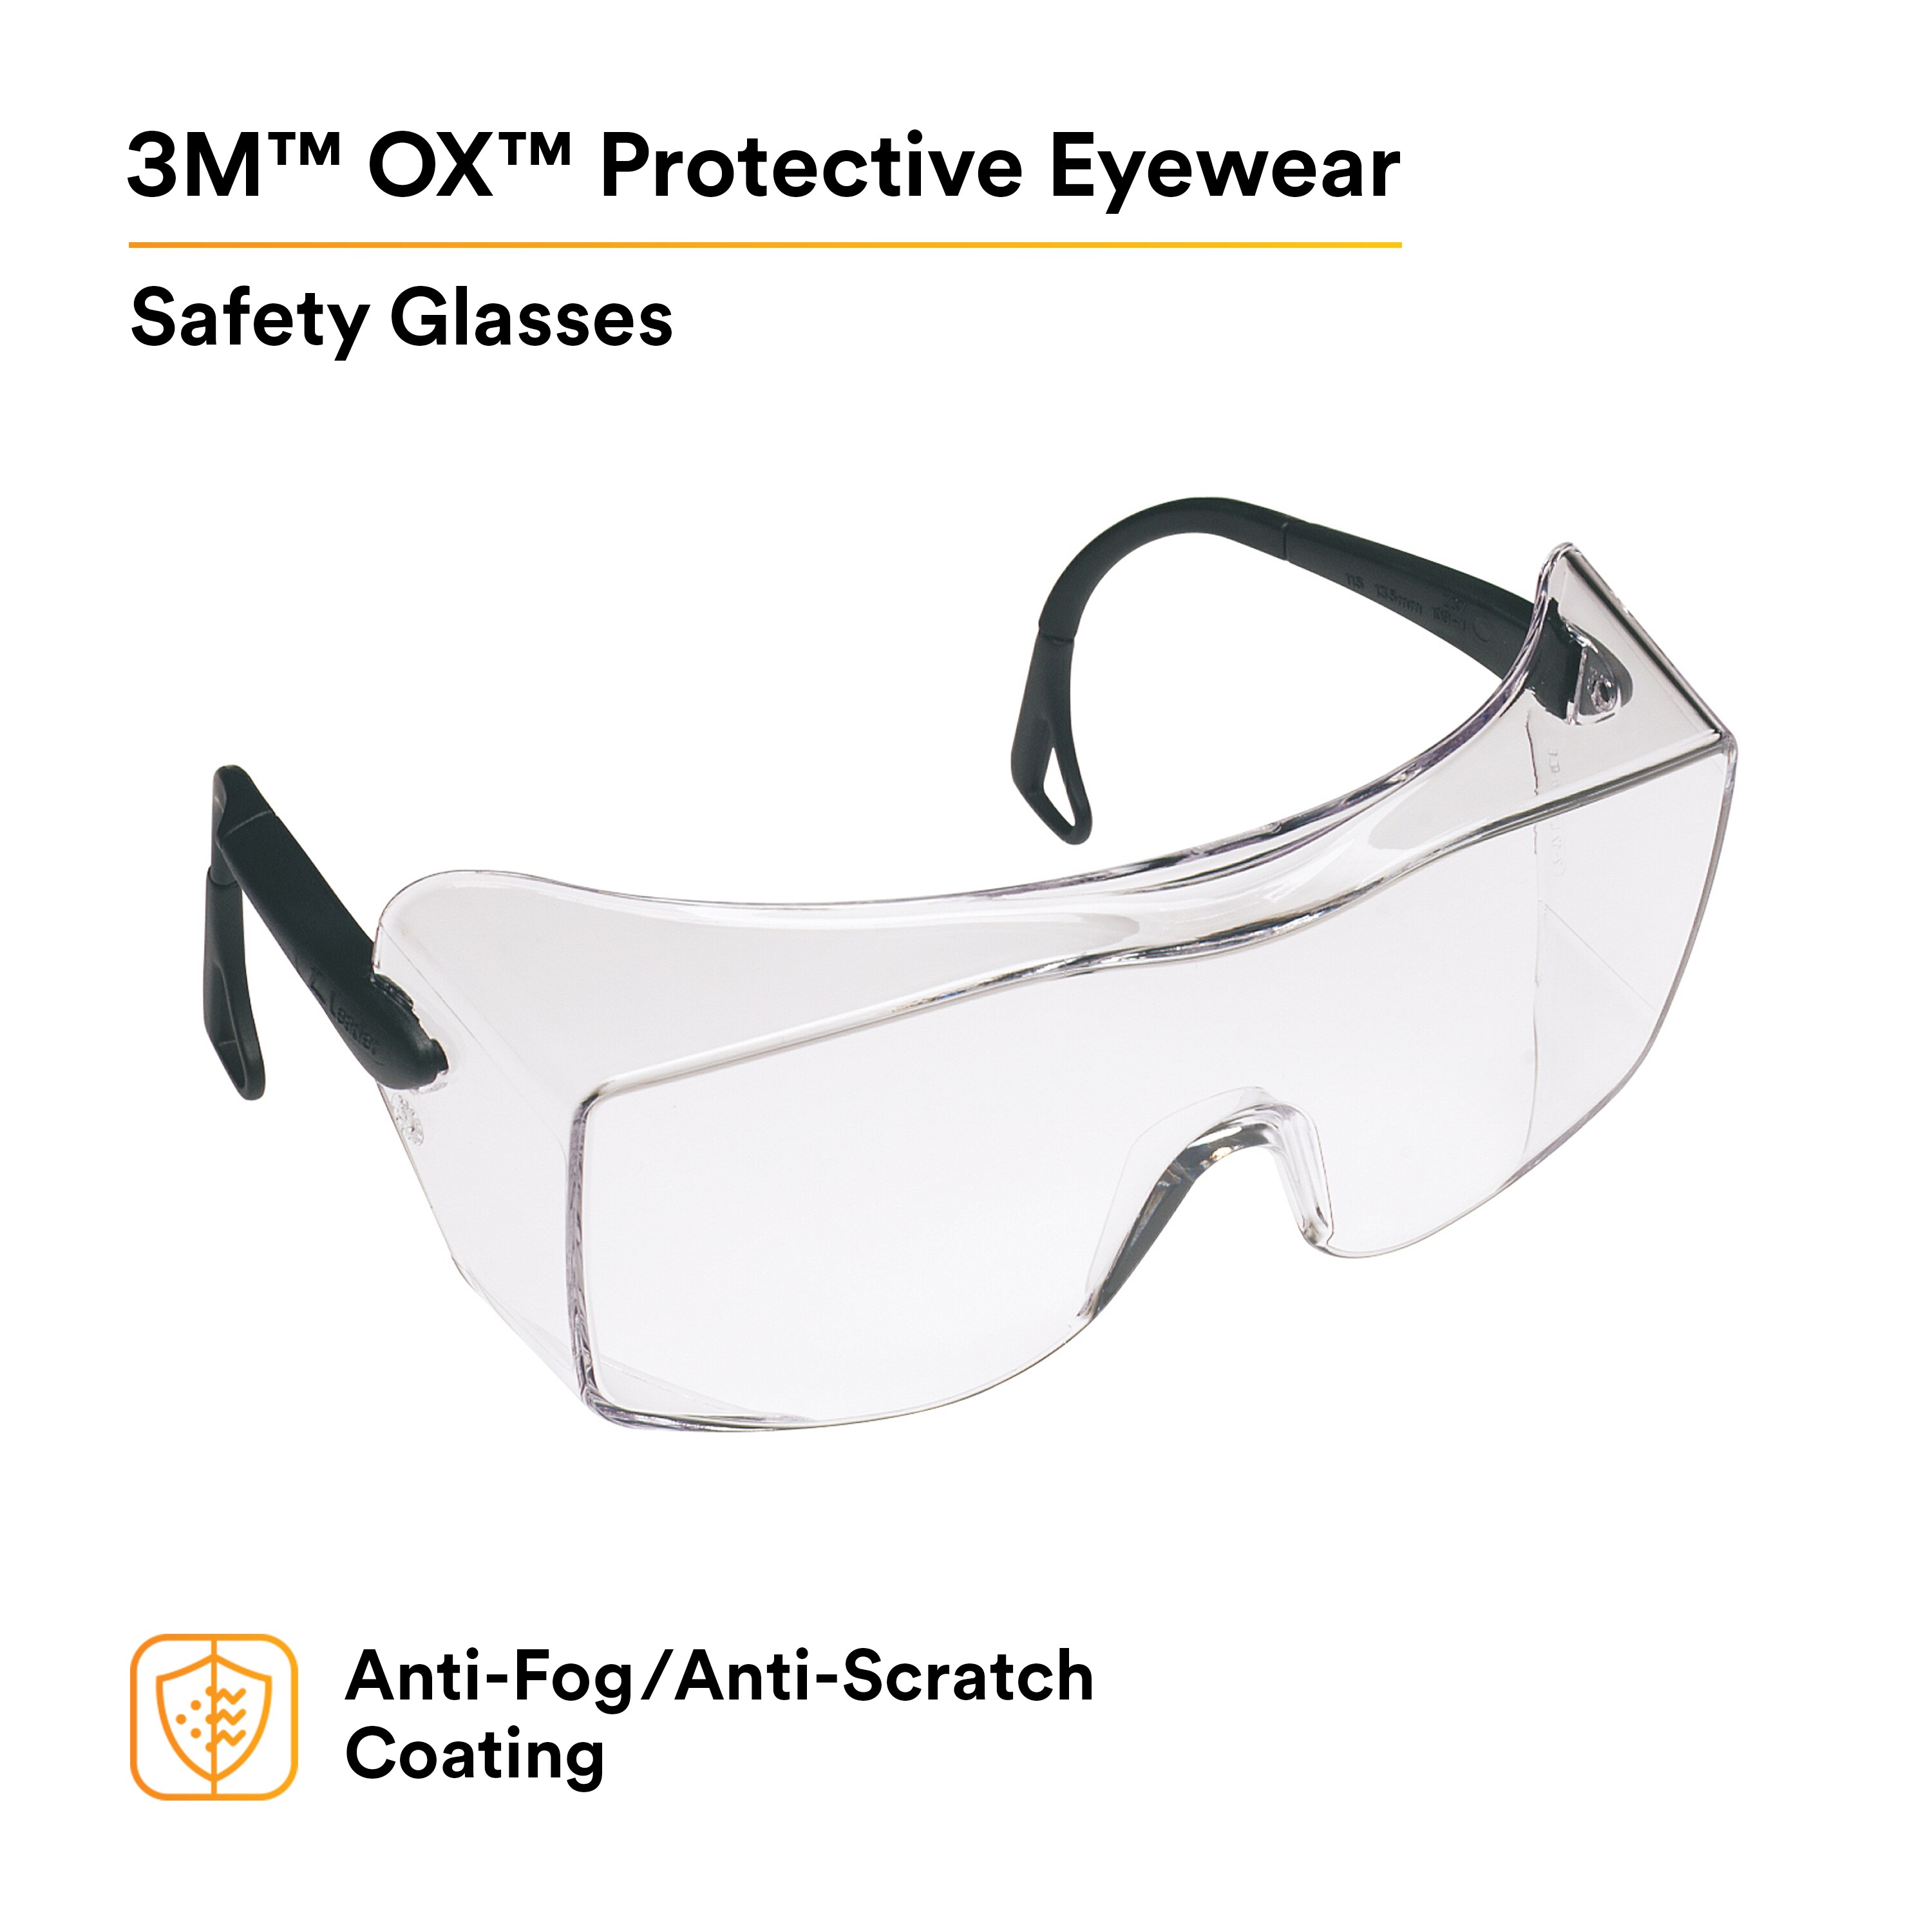 3M OX Protective 2000 Clear Anti-Fog Lens with Black Secure Grip Temple (20 per Case) from Columbia Safety